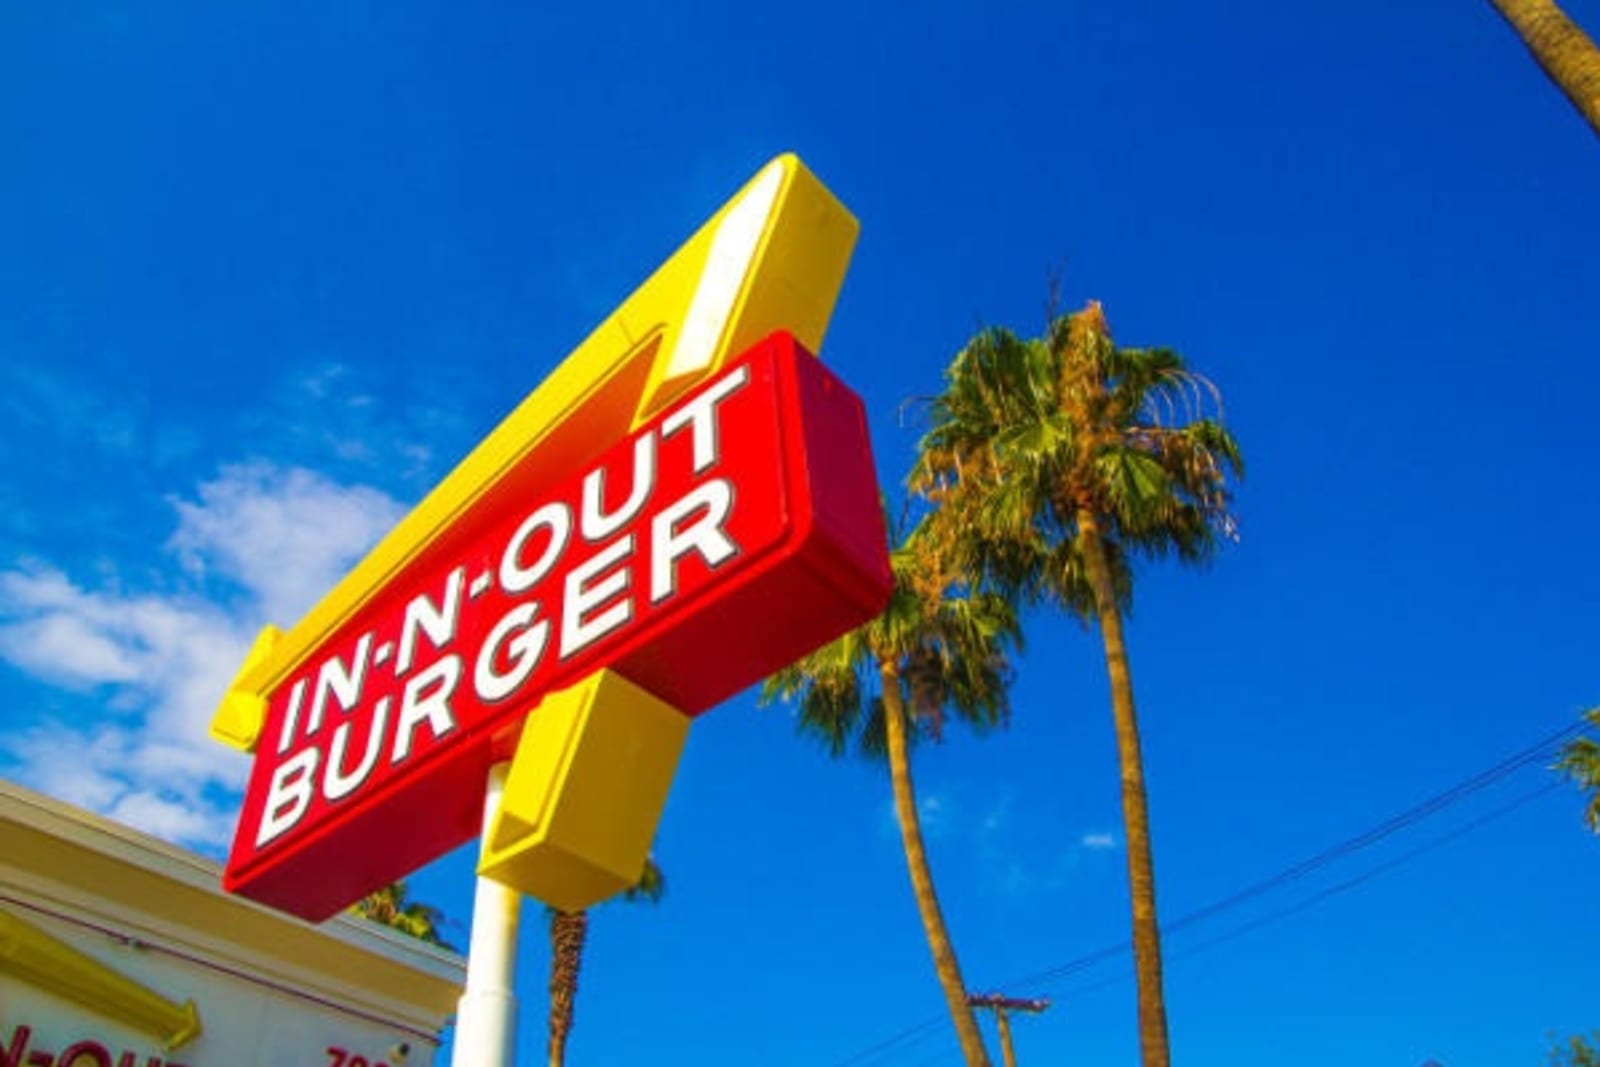 In n out burger restaurant sign